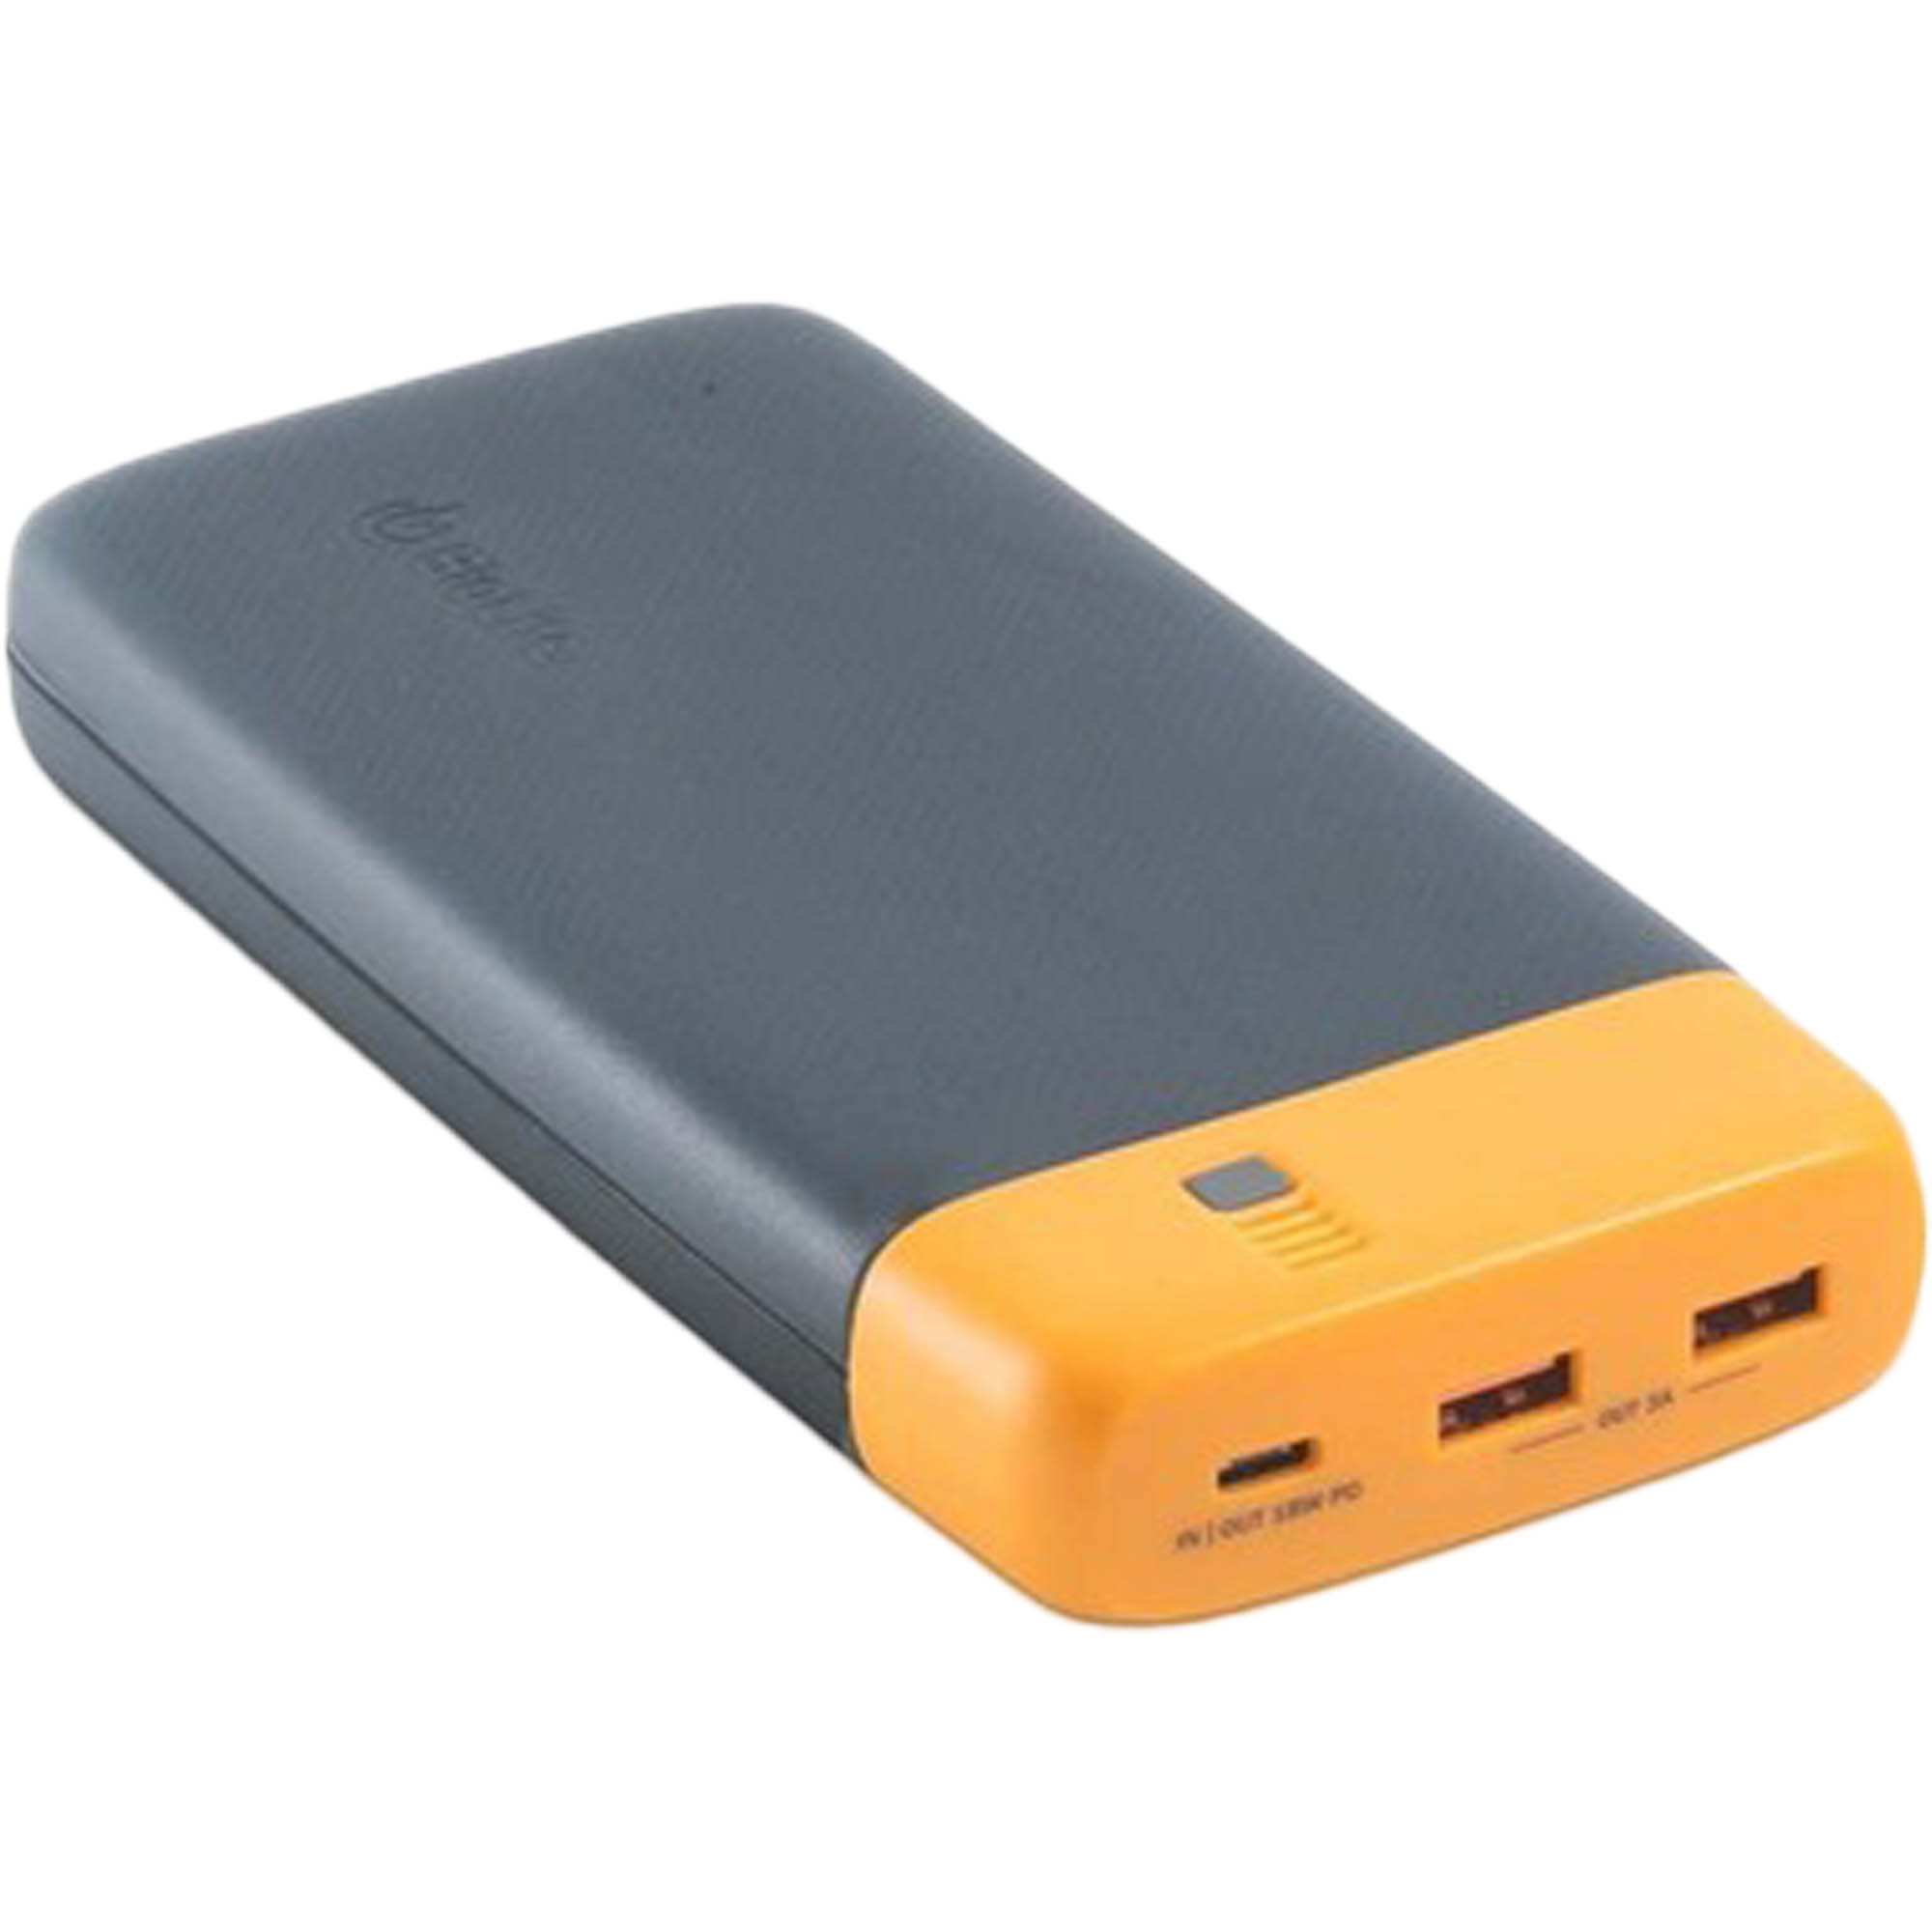 BioLite Charge 80 PD USB Device Charger & Power Pack 